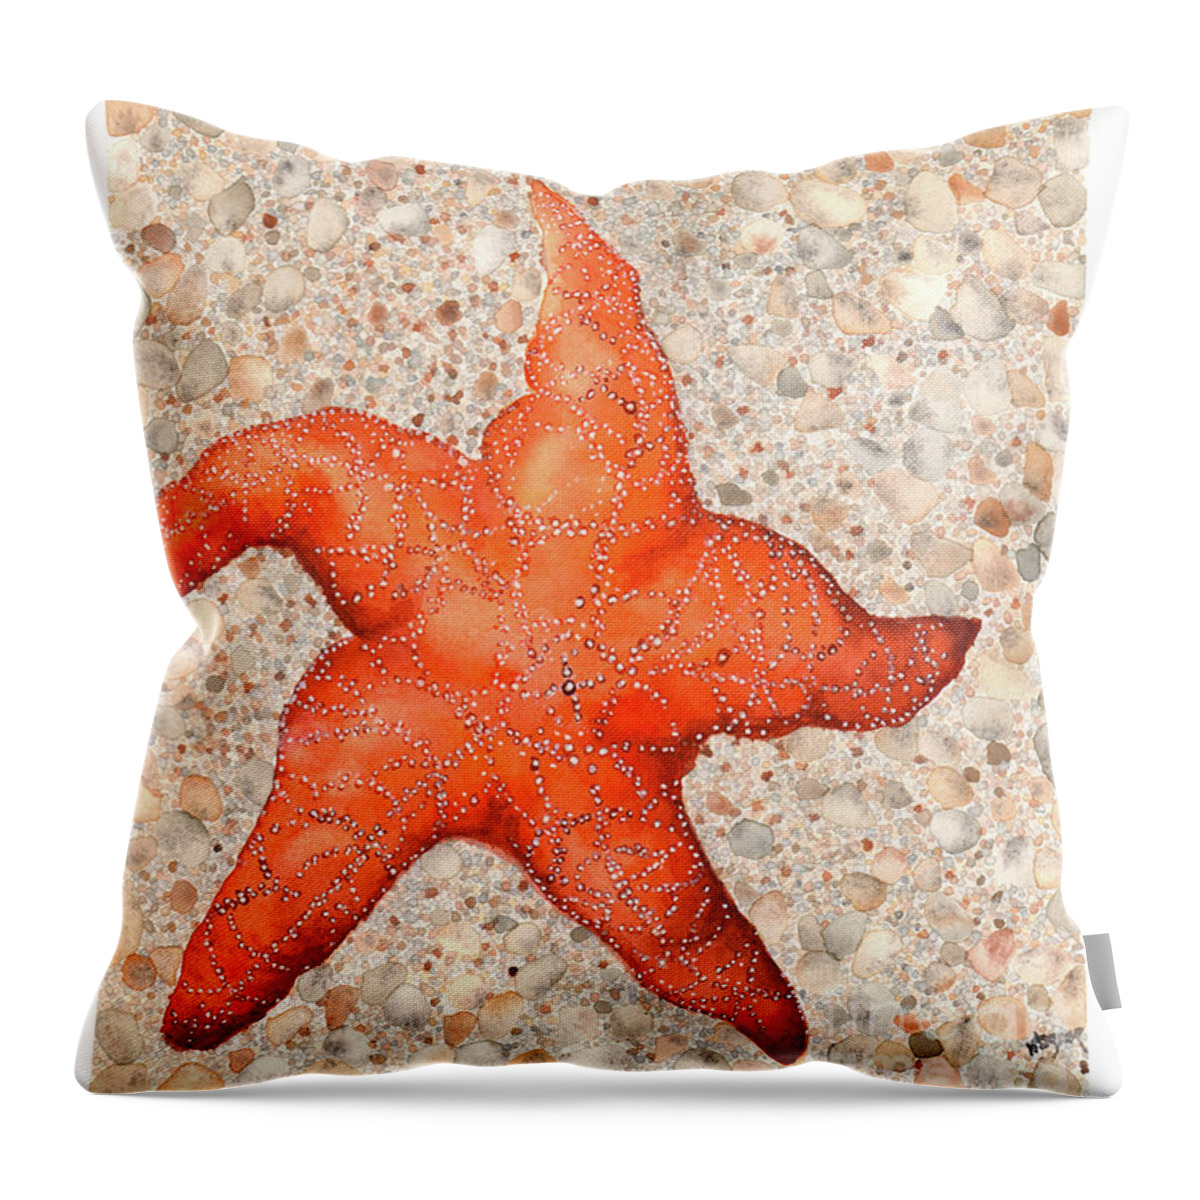 Starfish Throw Pillow featuring the painting Stranded Starfish by Hilda Wagner